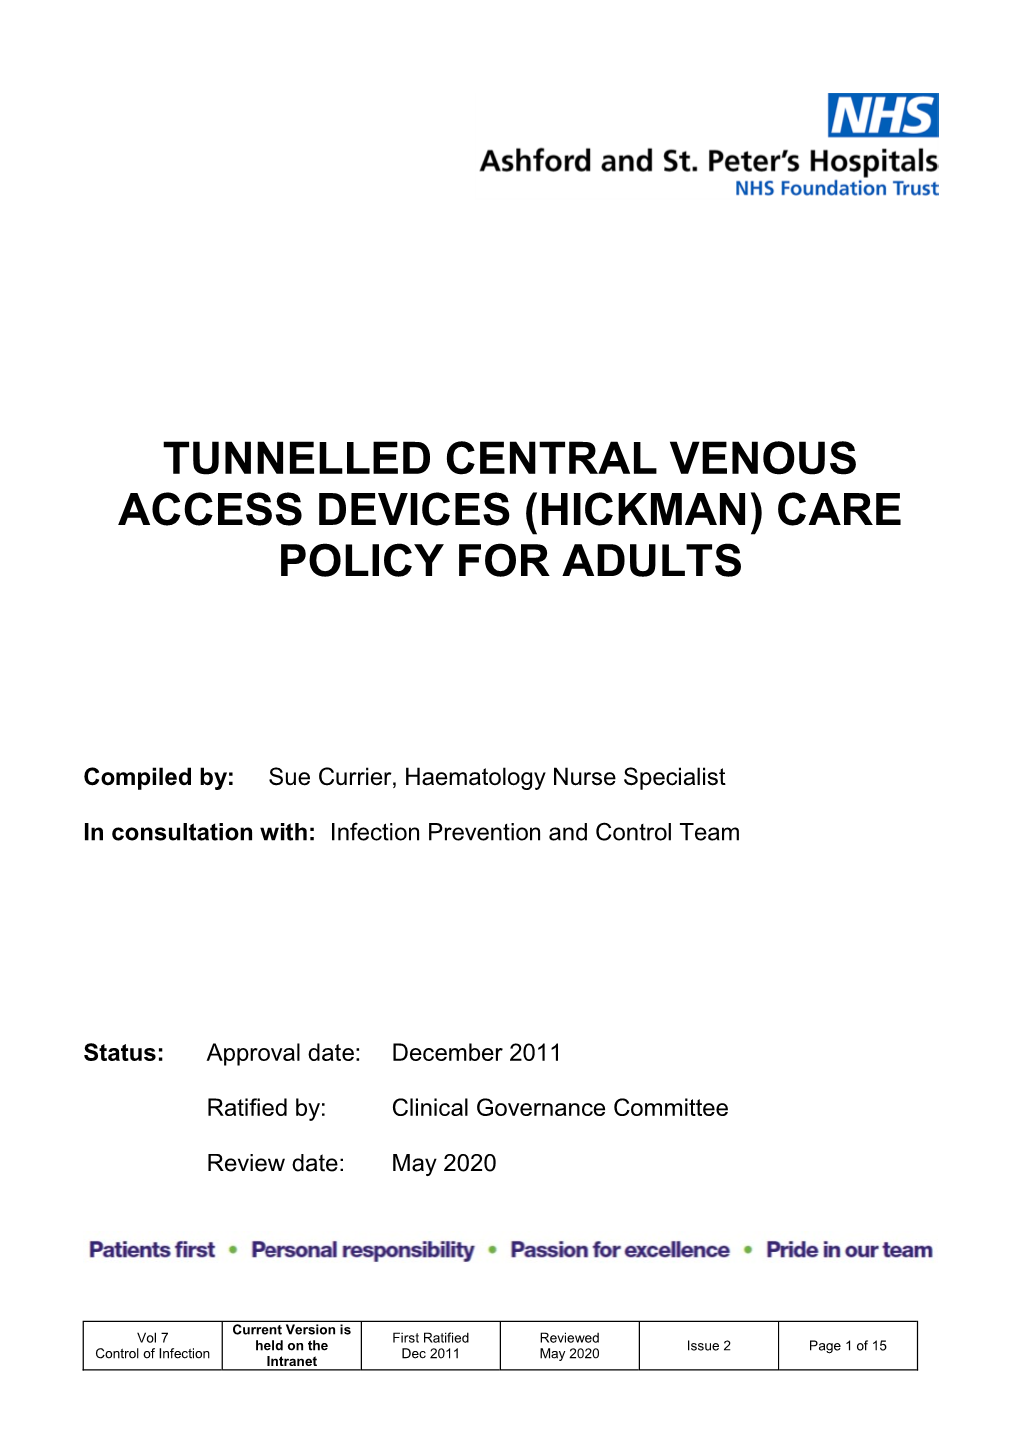 Tunnelled Central Venous Access Devices (Hickman) Care Policy for Adults